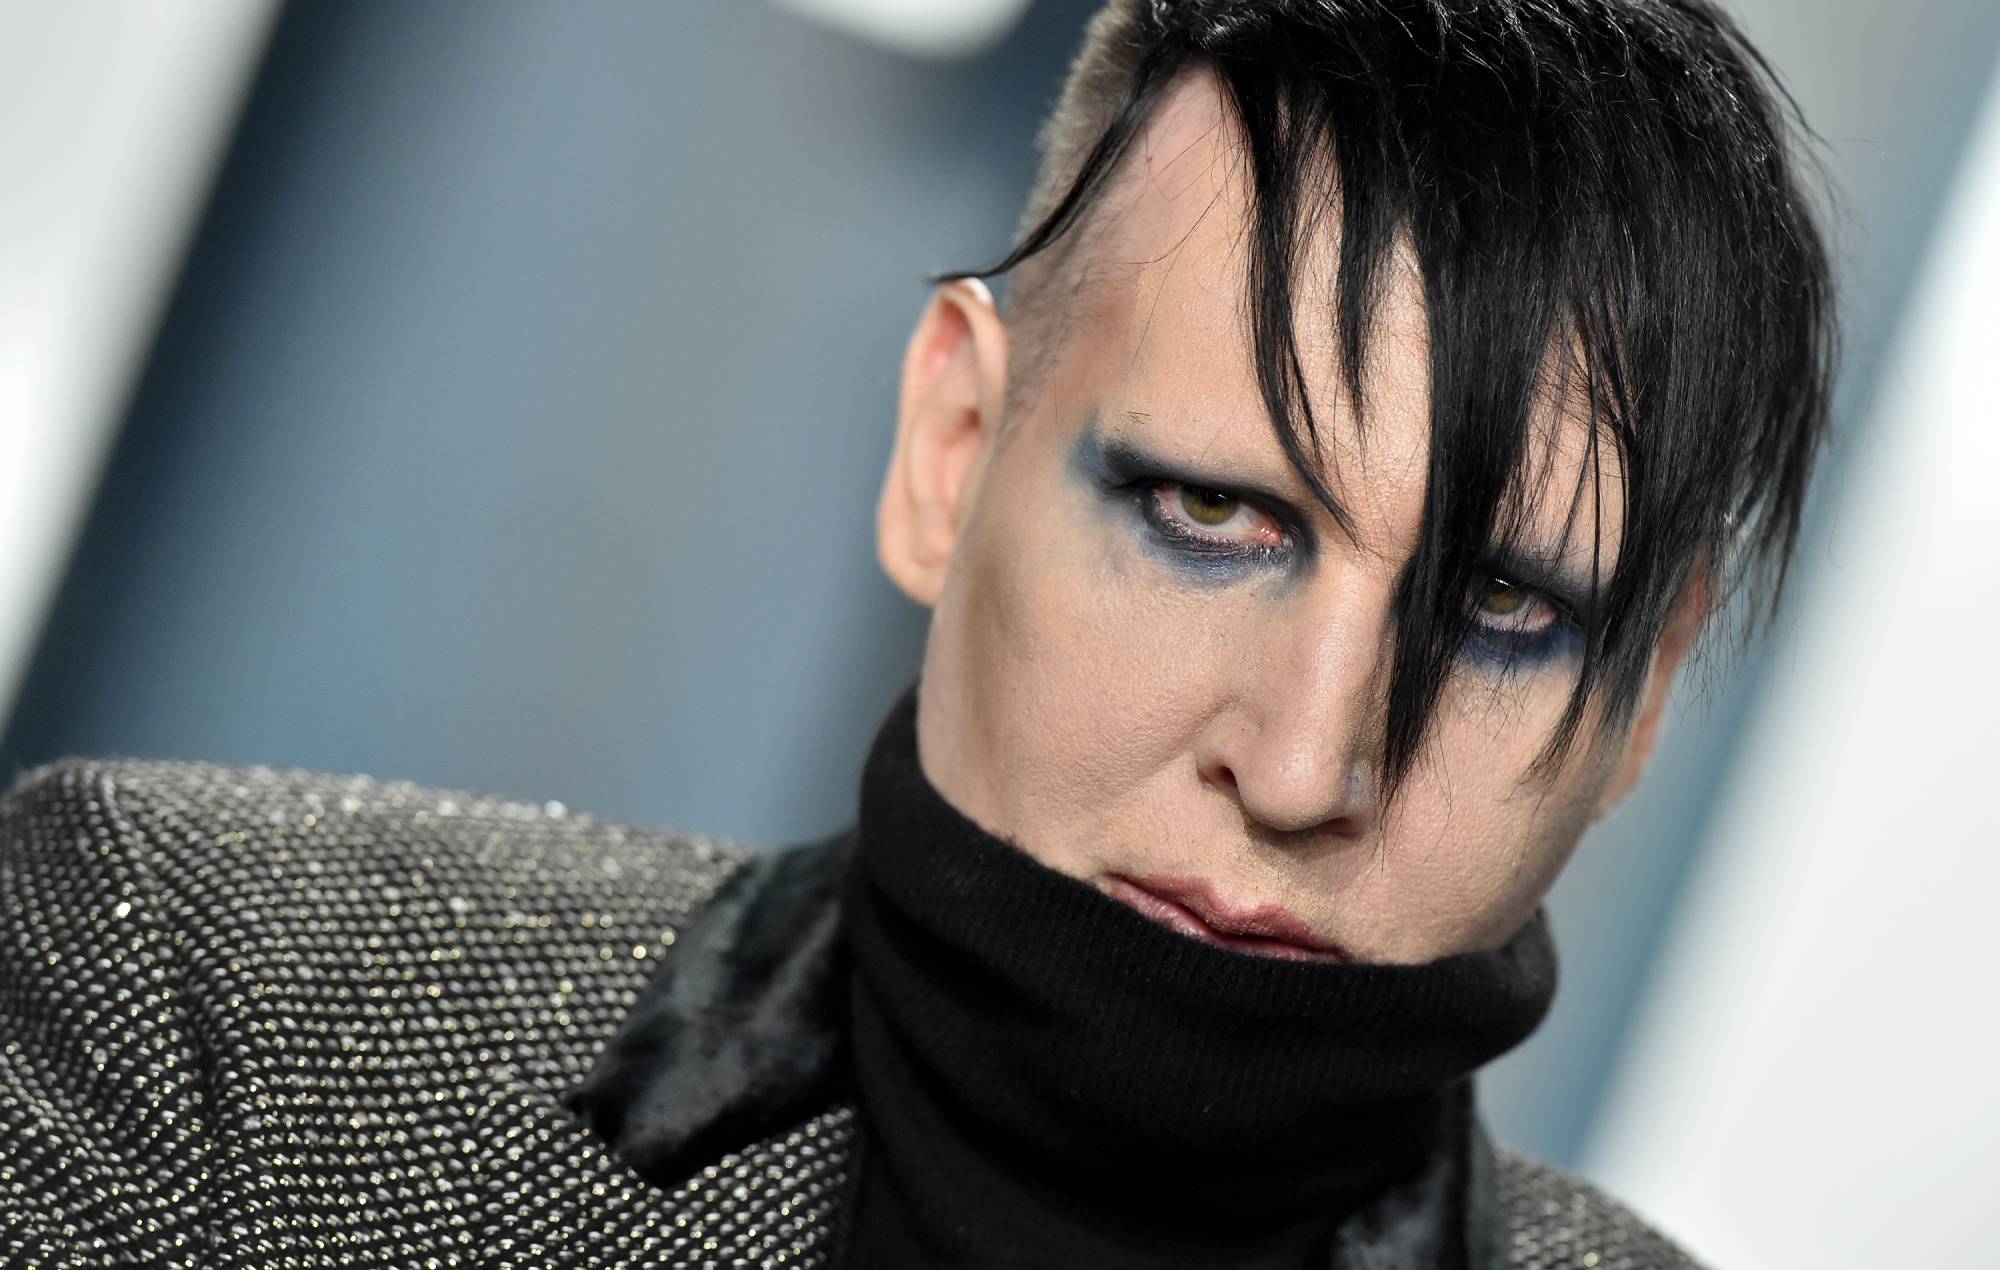 Marilyn Manson attends the 2020 Vanity Fair Oscar Party hosted by Radhika Jones at Wallis Annenberg Center for the Performing Arts on February 09, 2020. Credit: Axelle/Bauer-Griffin/GETTY